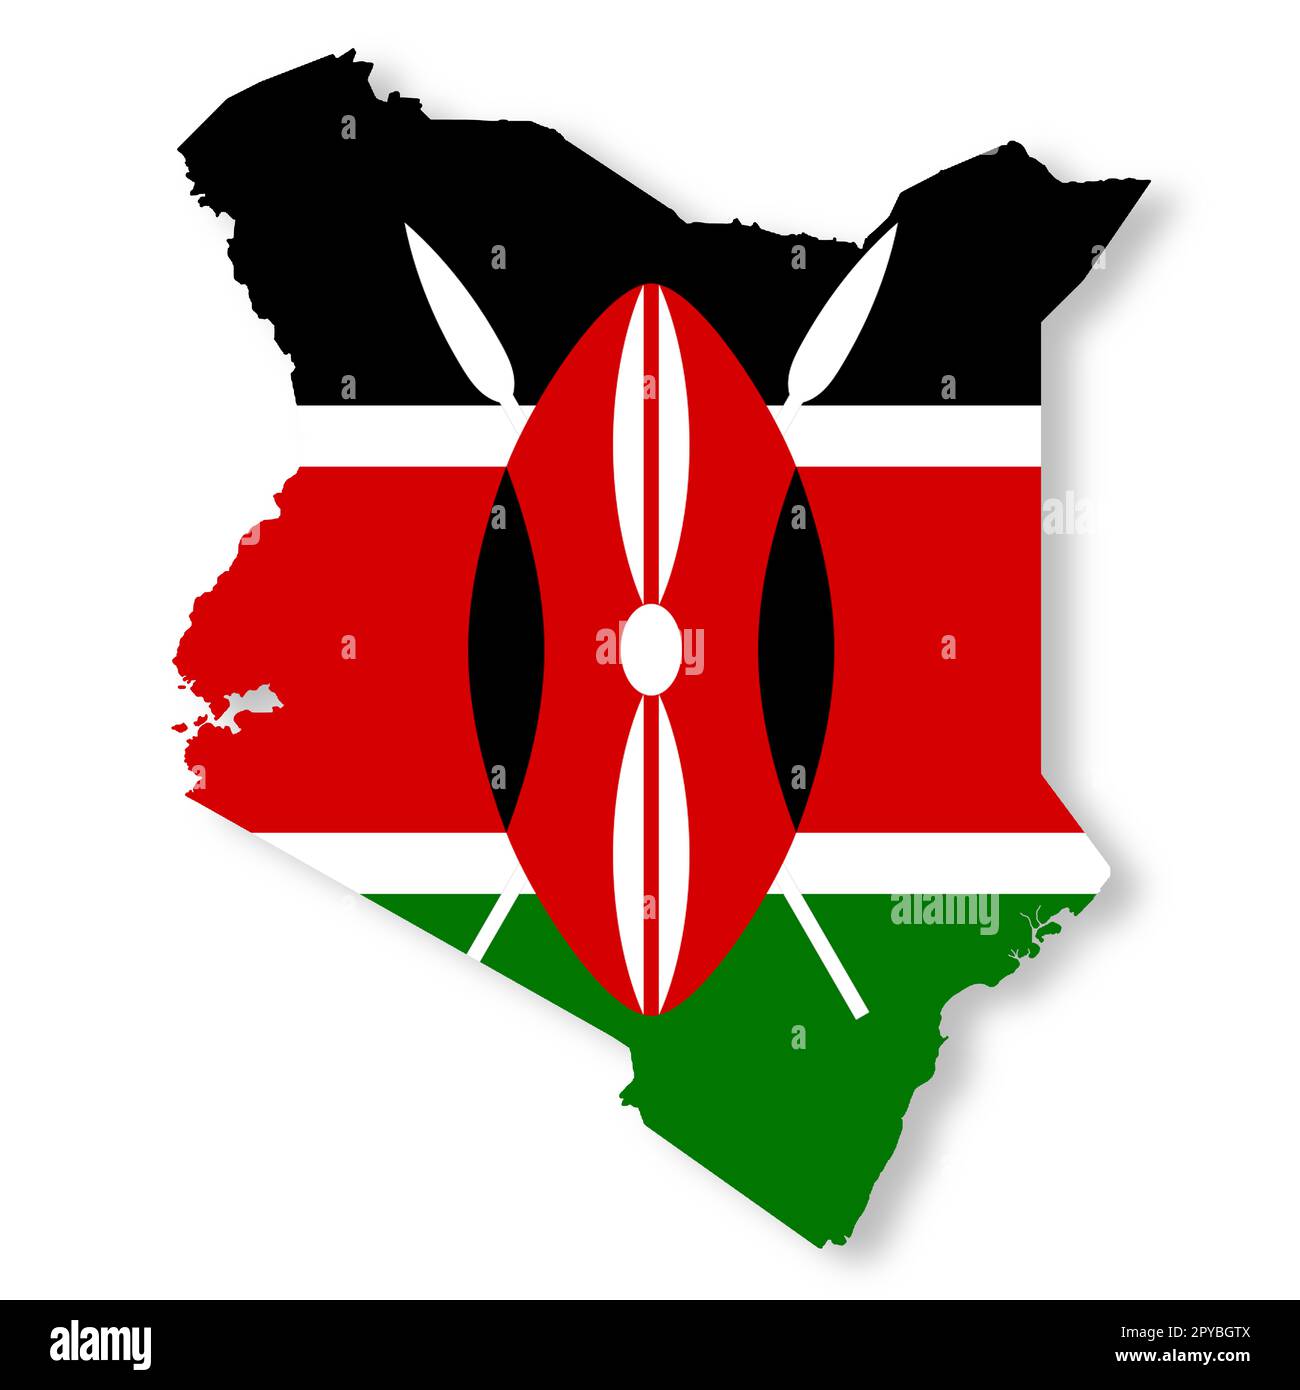 Kenya flag map with clipping path to remove shadow 3d illustration Stock Photo